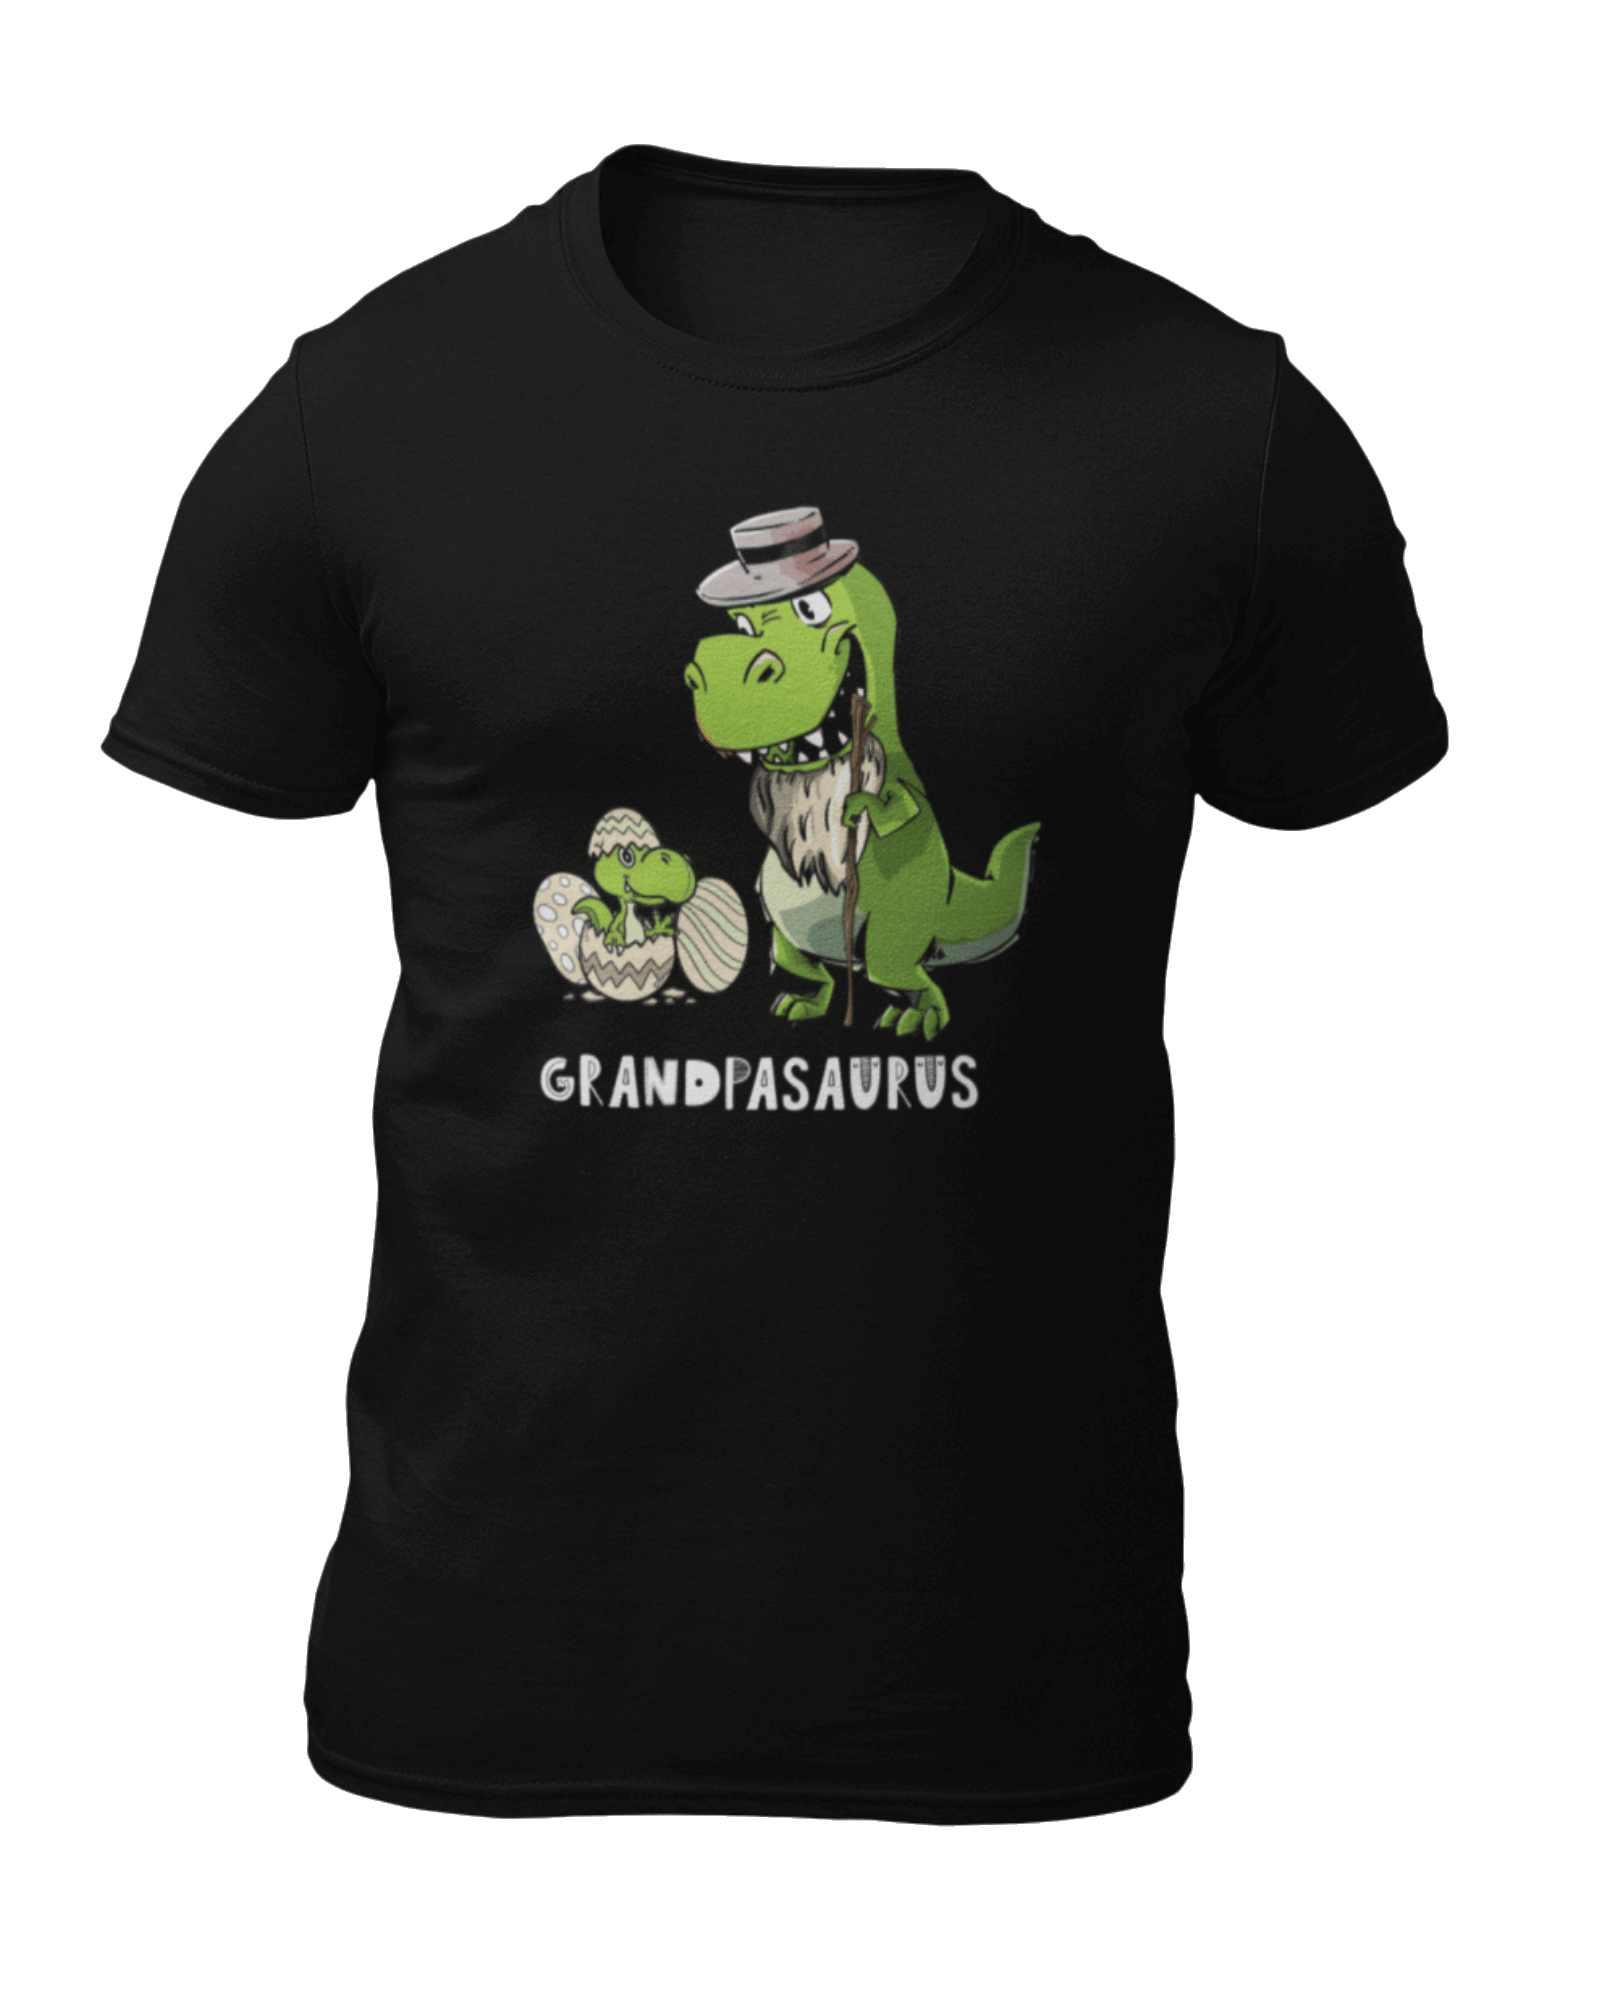 T Shirts With Dinosaurs